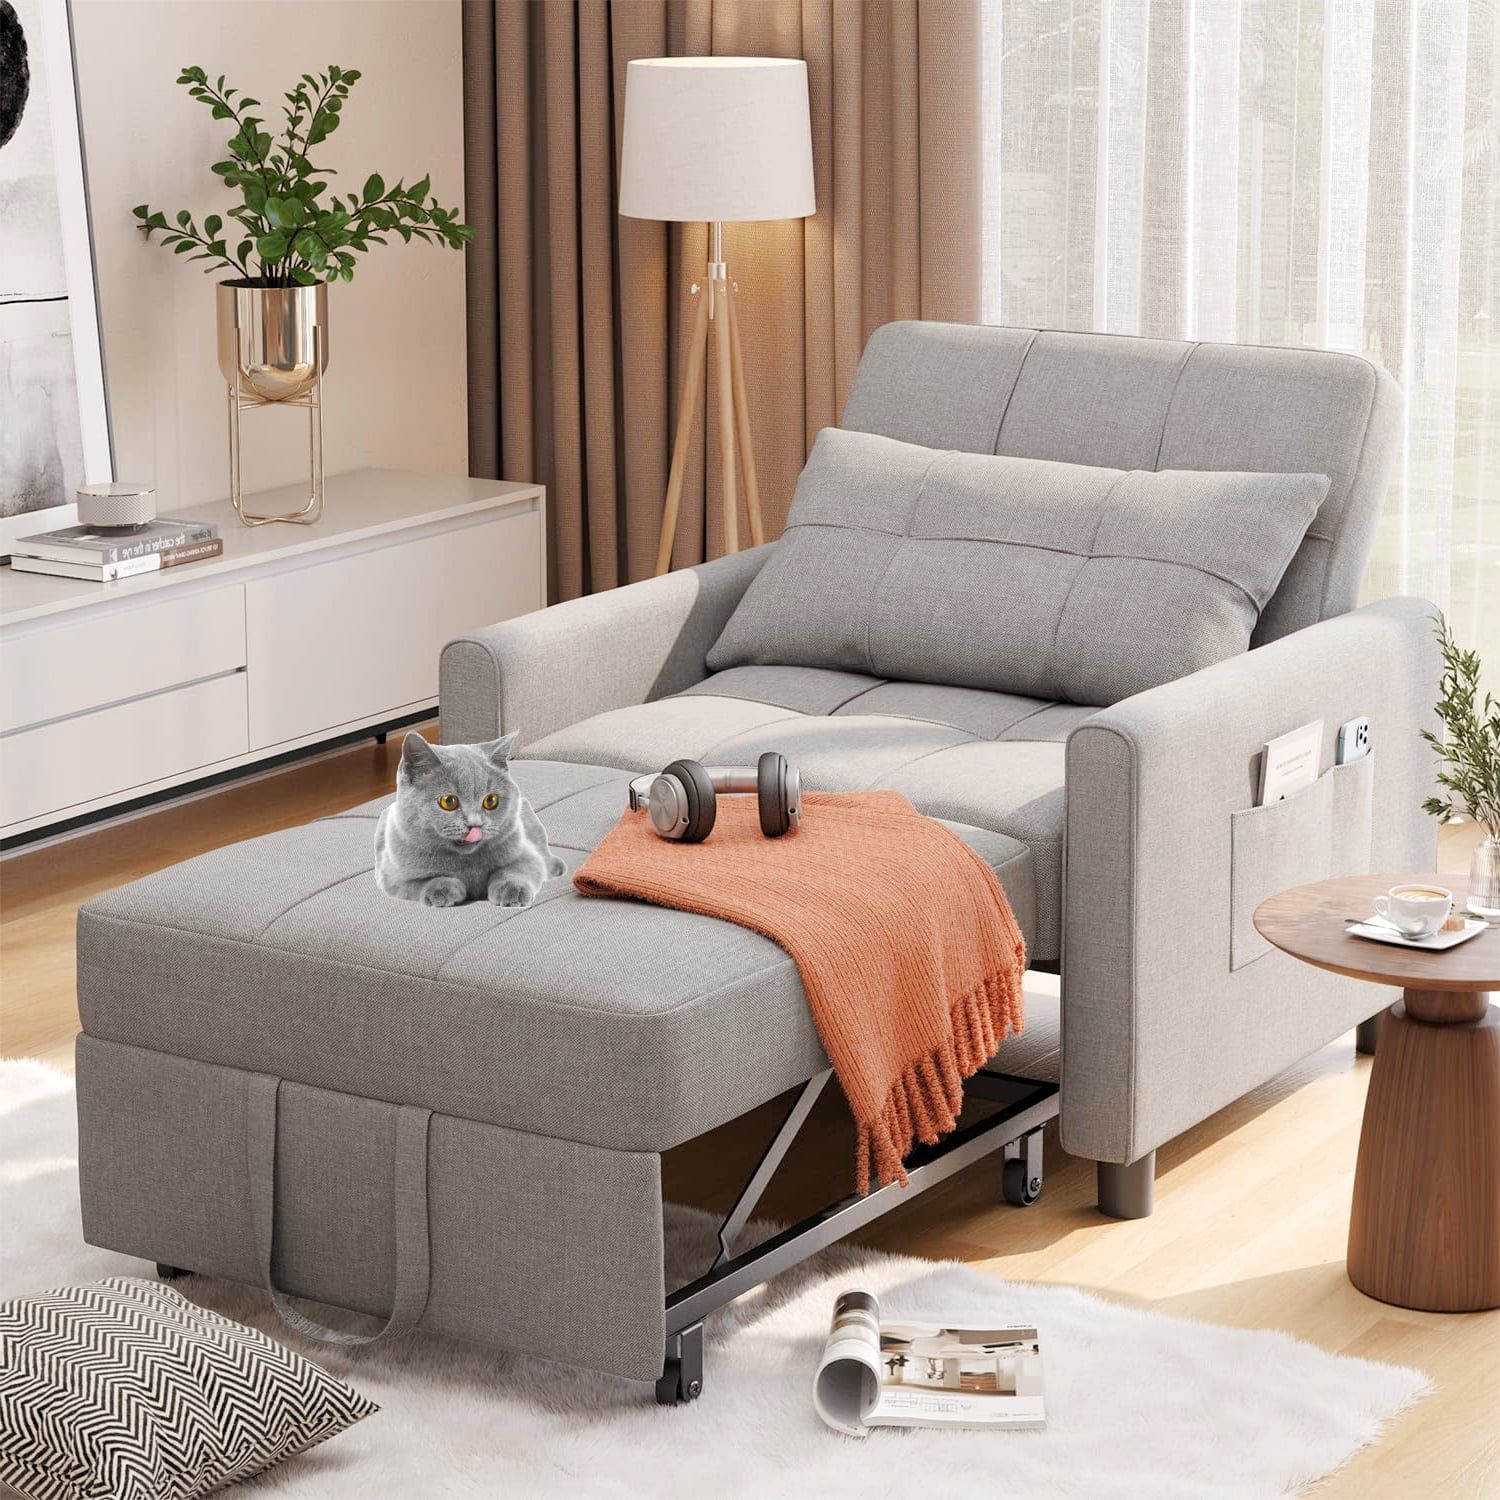 Lofka Sofa Bed, Convertible Chair Bed 3 In 1 Single Couch Bed, Light Gray –  Walmart Throughout Convertible Light Gray Chair Beds (Photo 2 of 15)